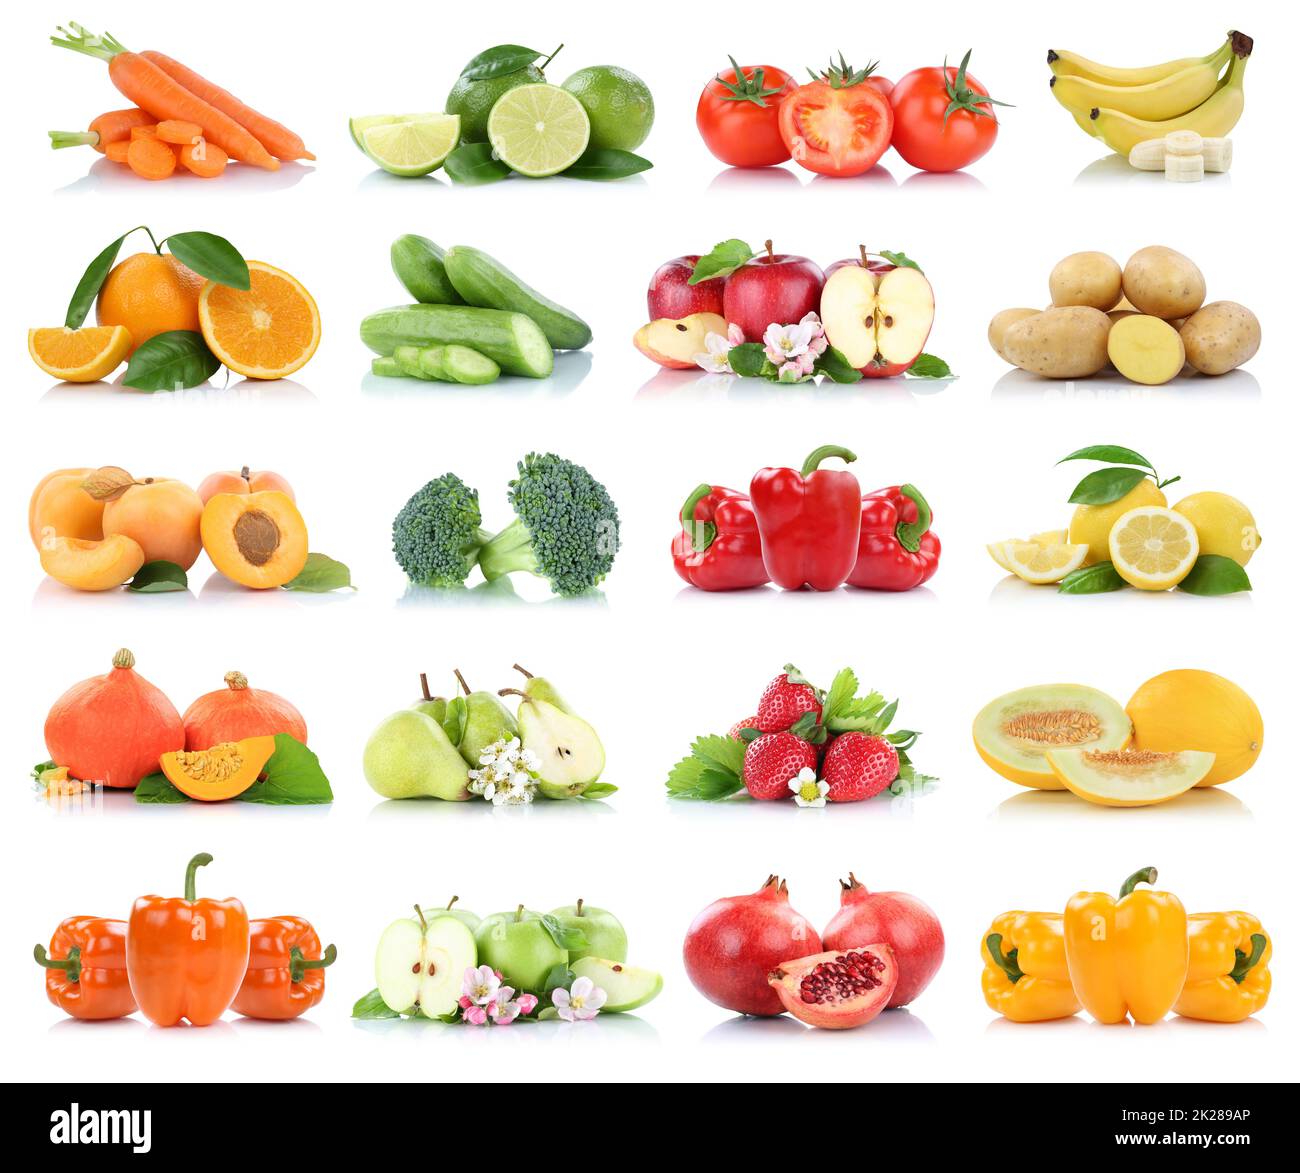 Fruits vegetables collection isolated apple apples oranges bell pepper tomatoes banana colors fresh fruit Stock Photo